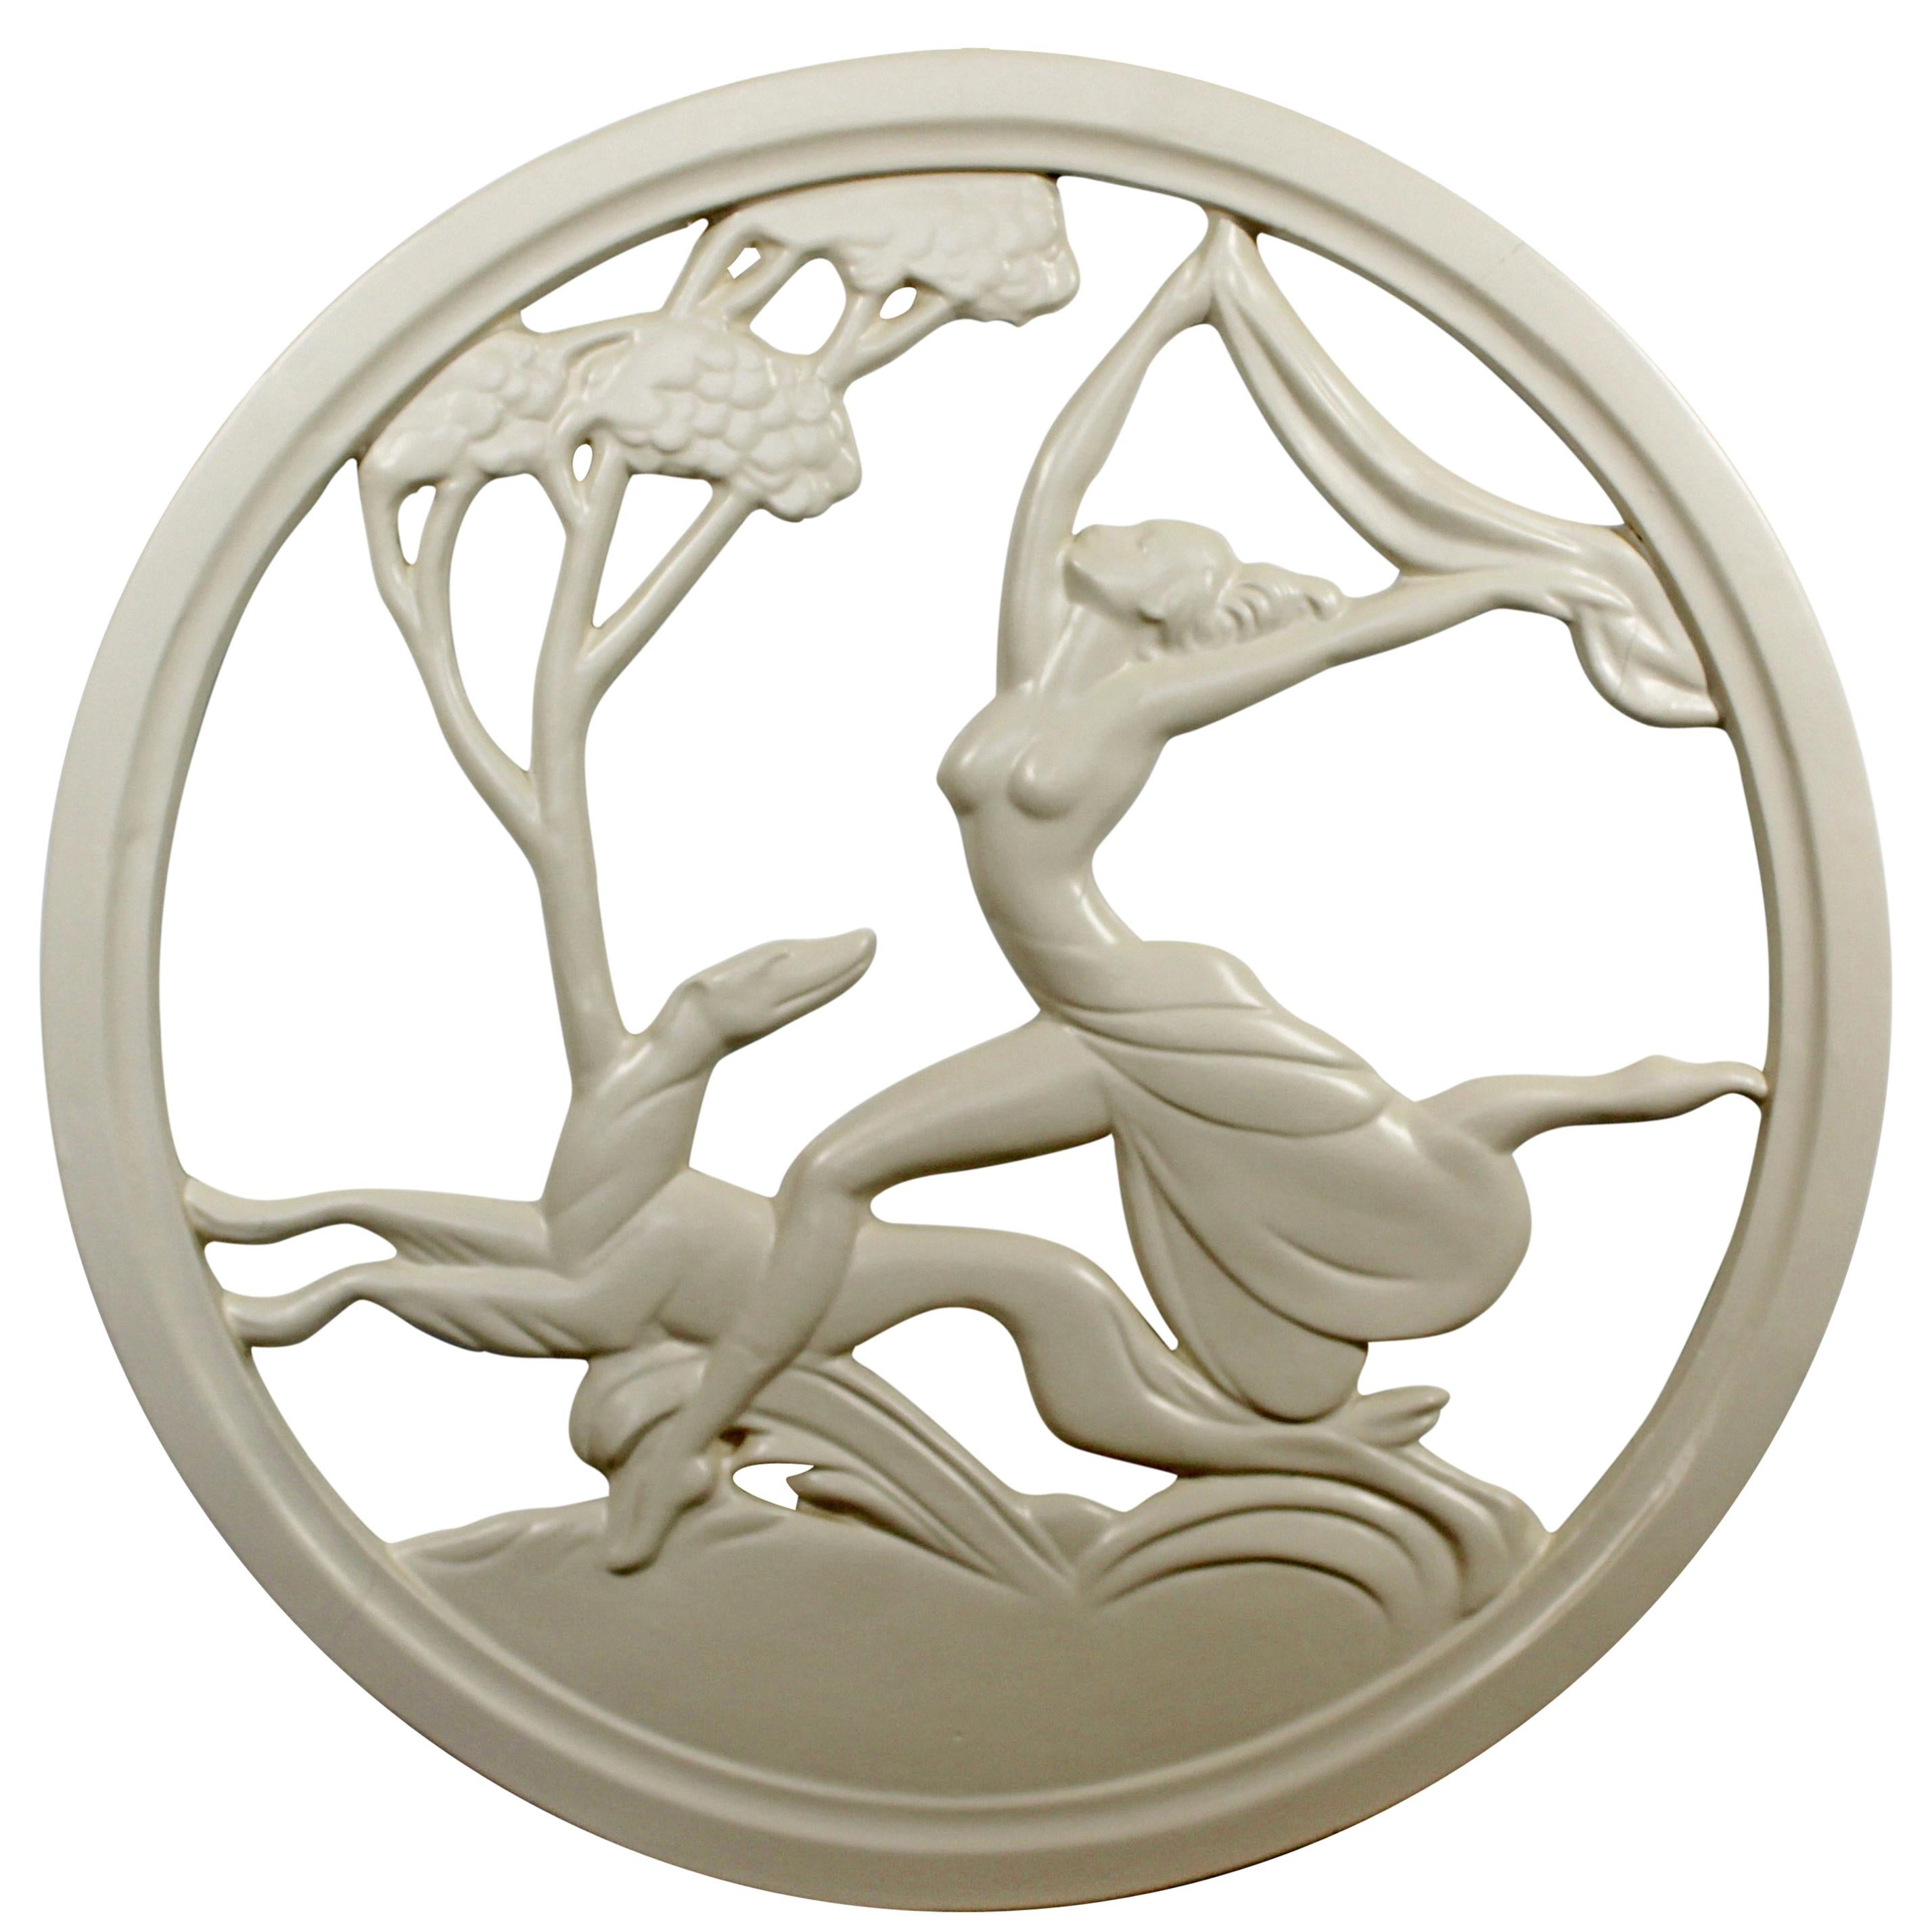 Art Deco Plaster Medallion from New Orleans Brothel of a Female & Greyhound